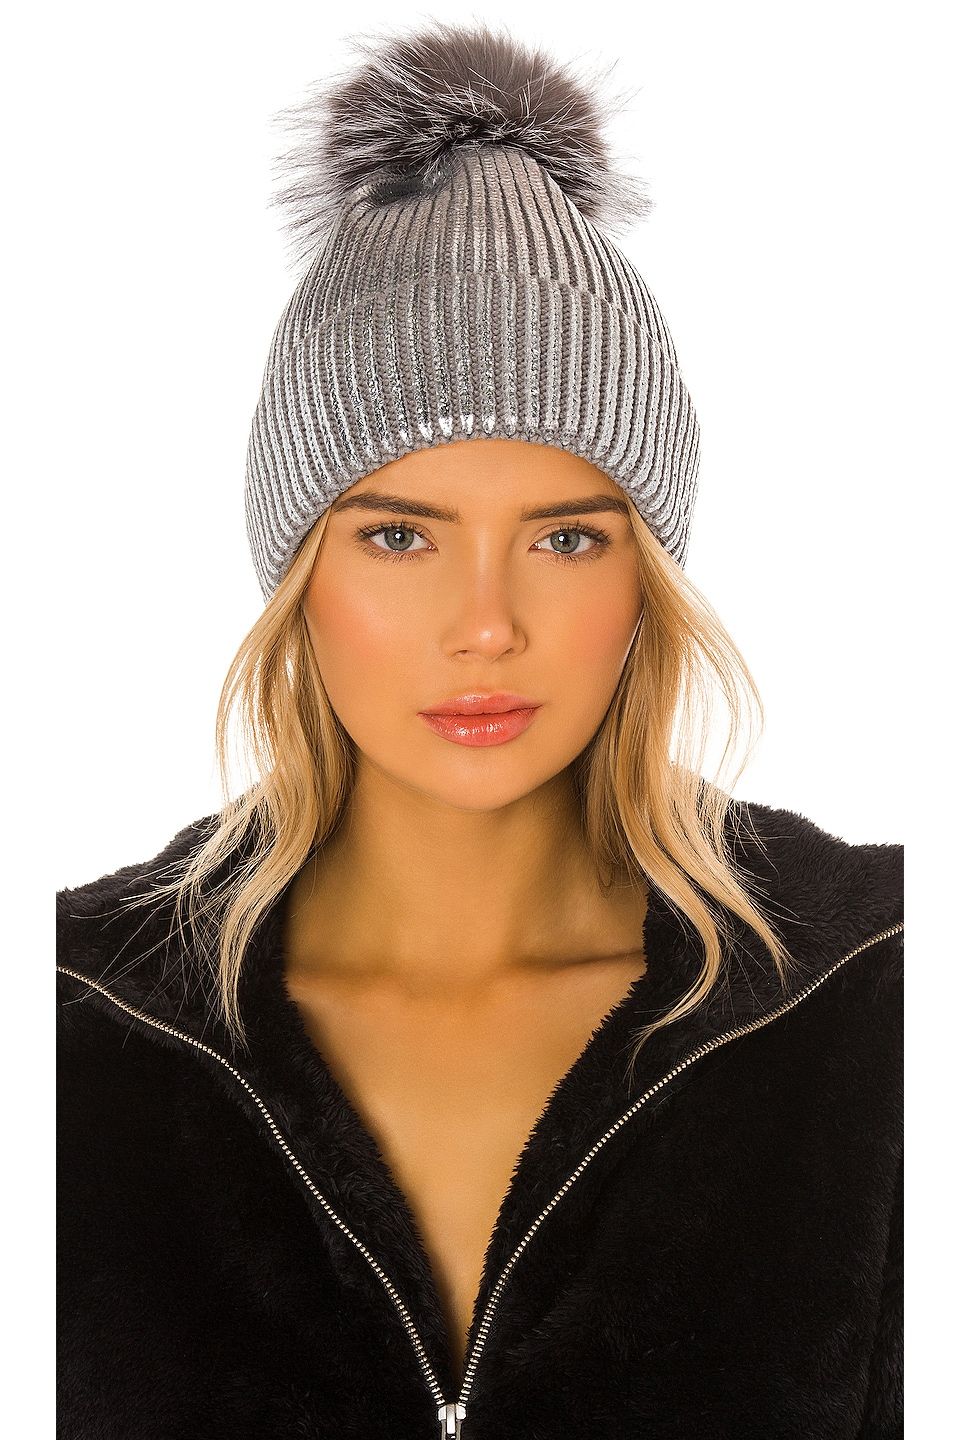 20 Cute Beanies and Hats for Women - Best Winter Hats